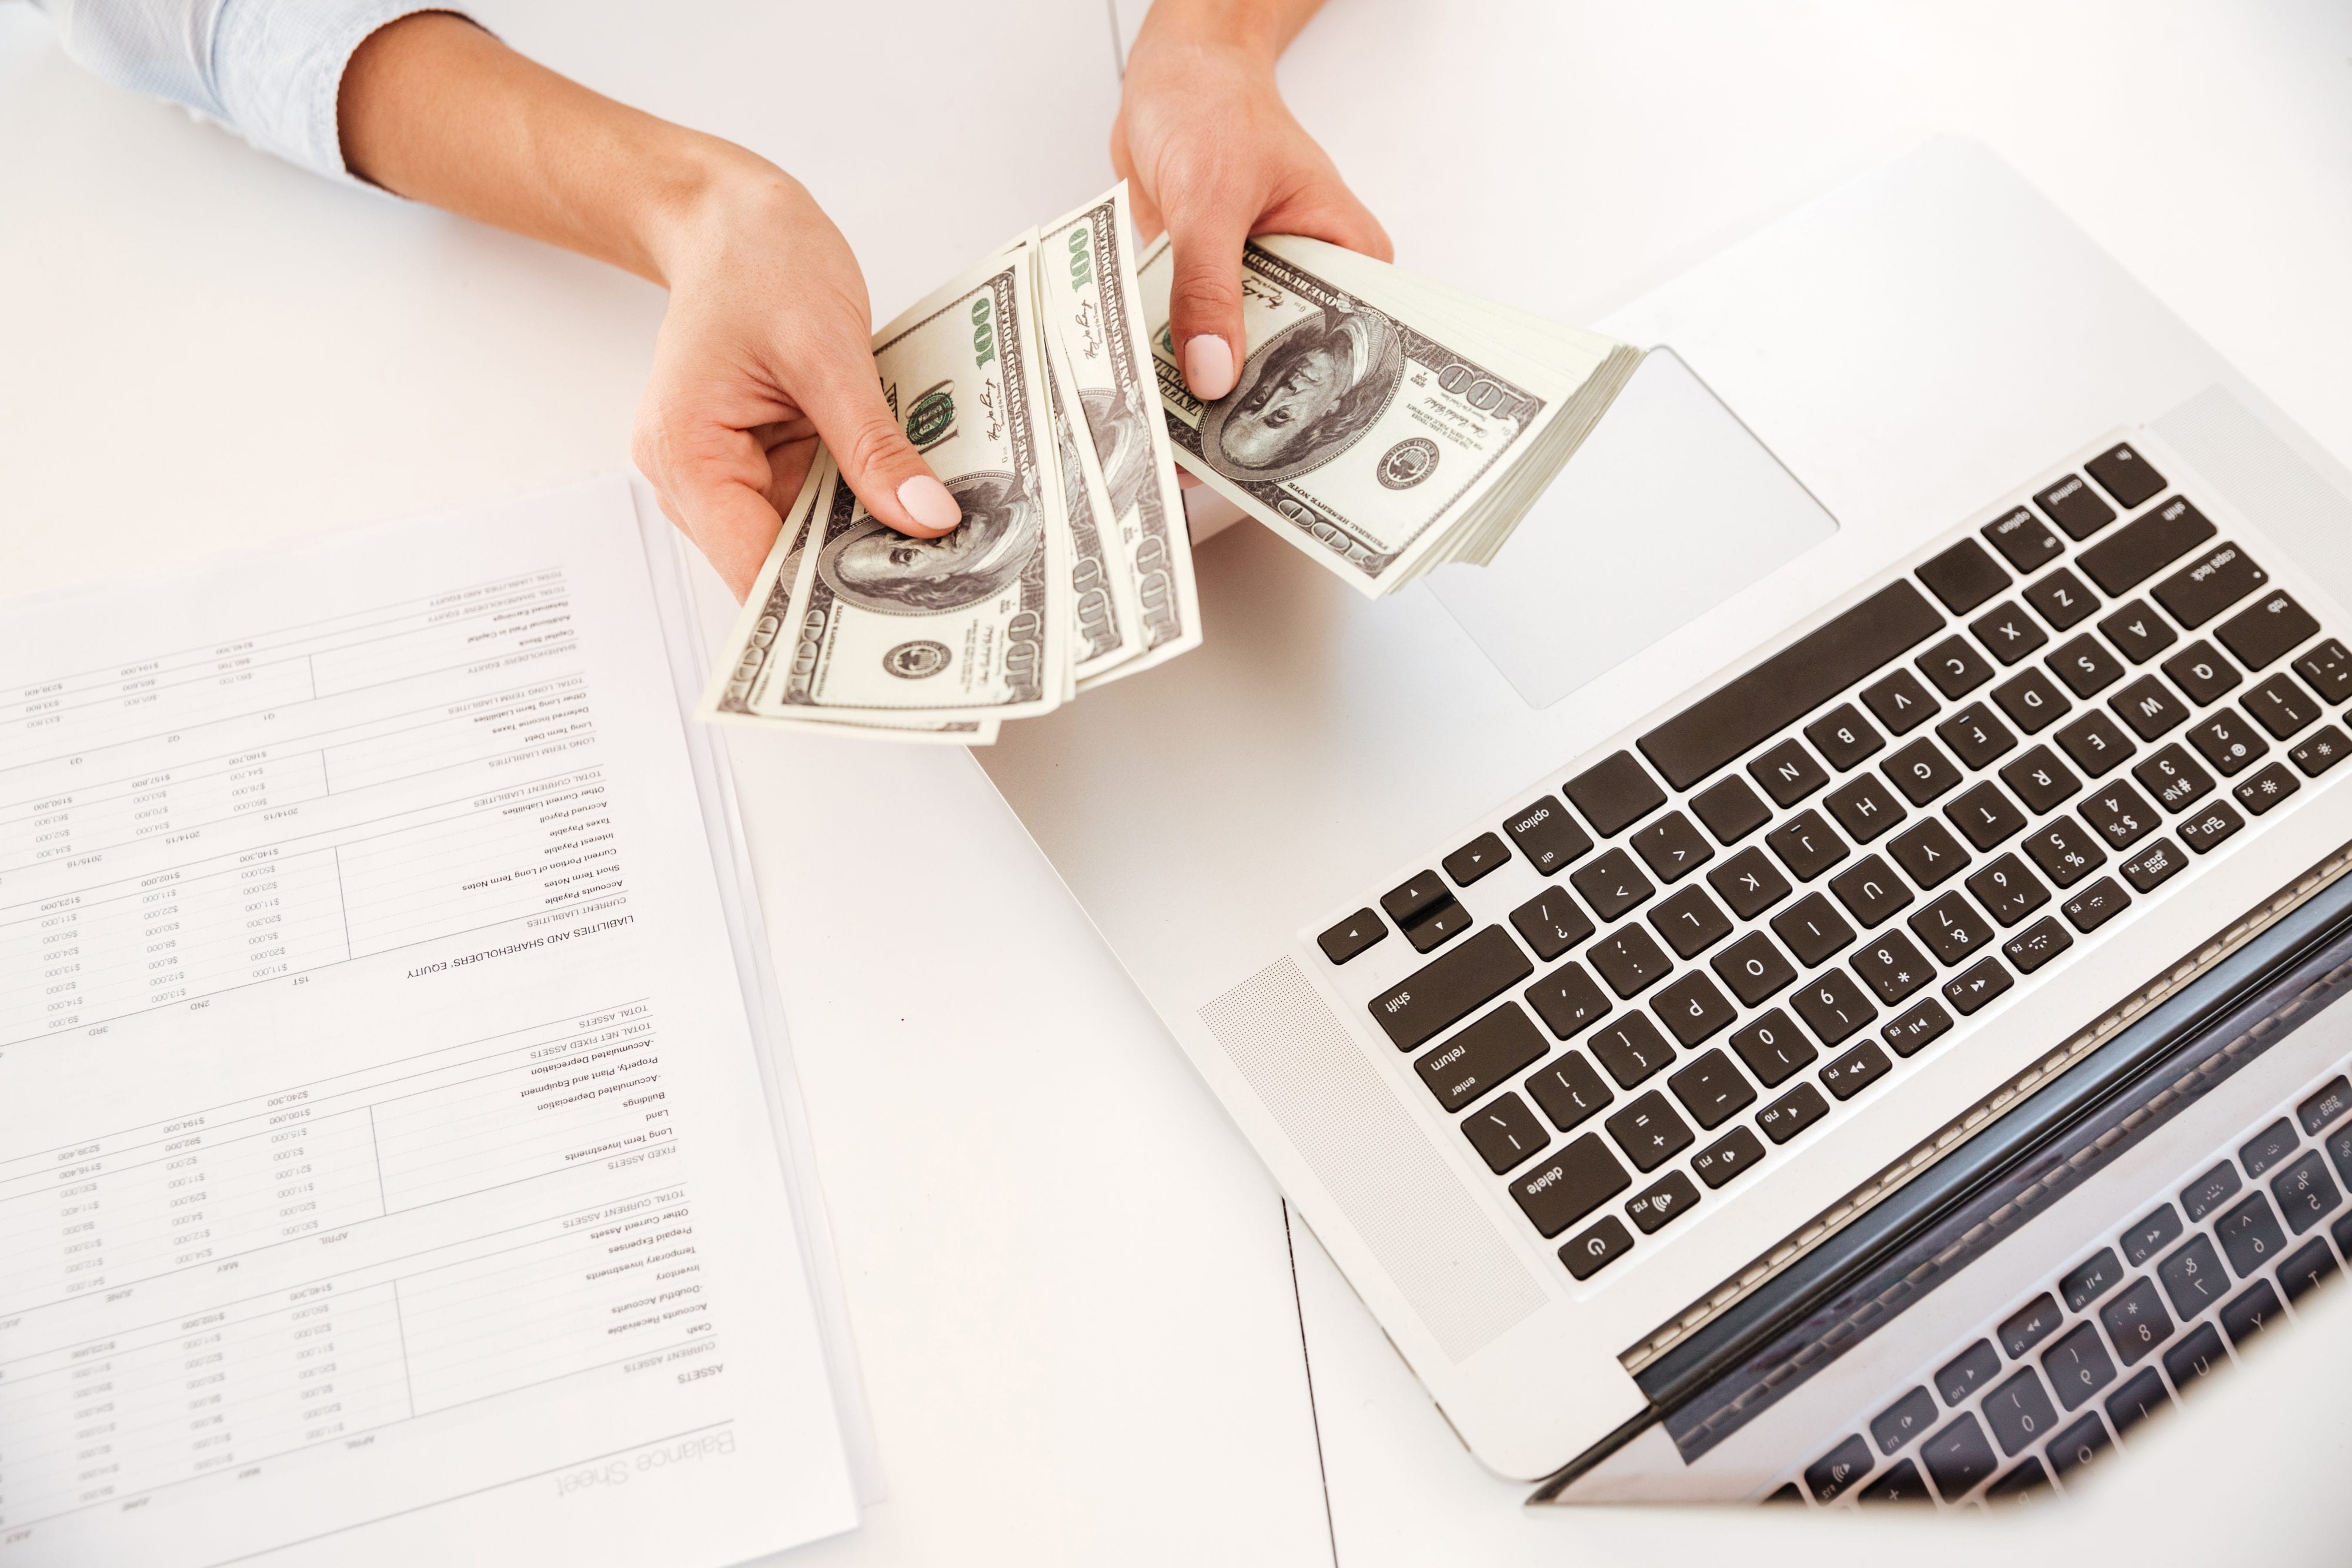 Cropped image of businesswoman sitting in her office and holding money near laptop